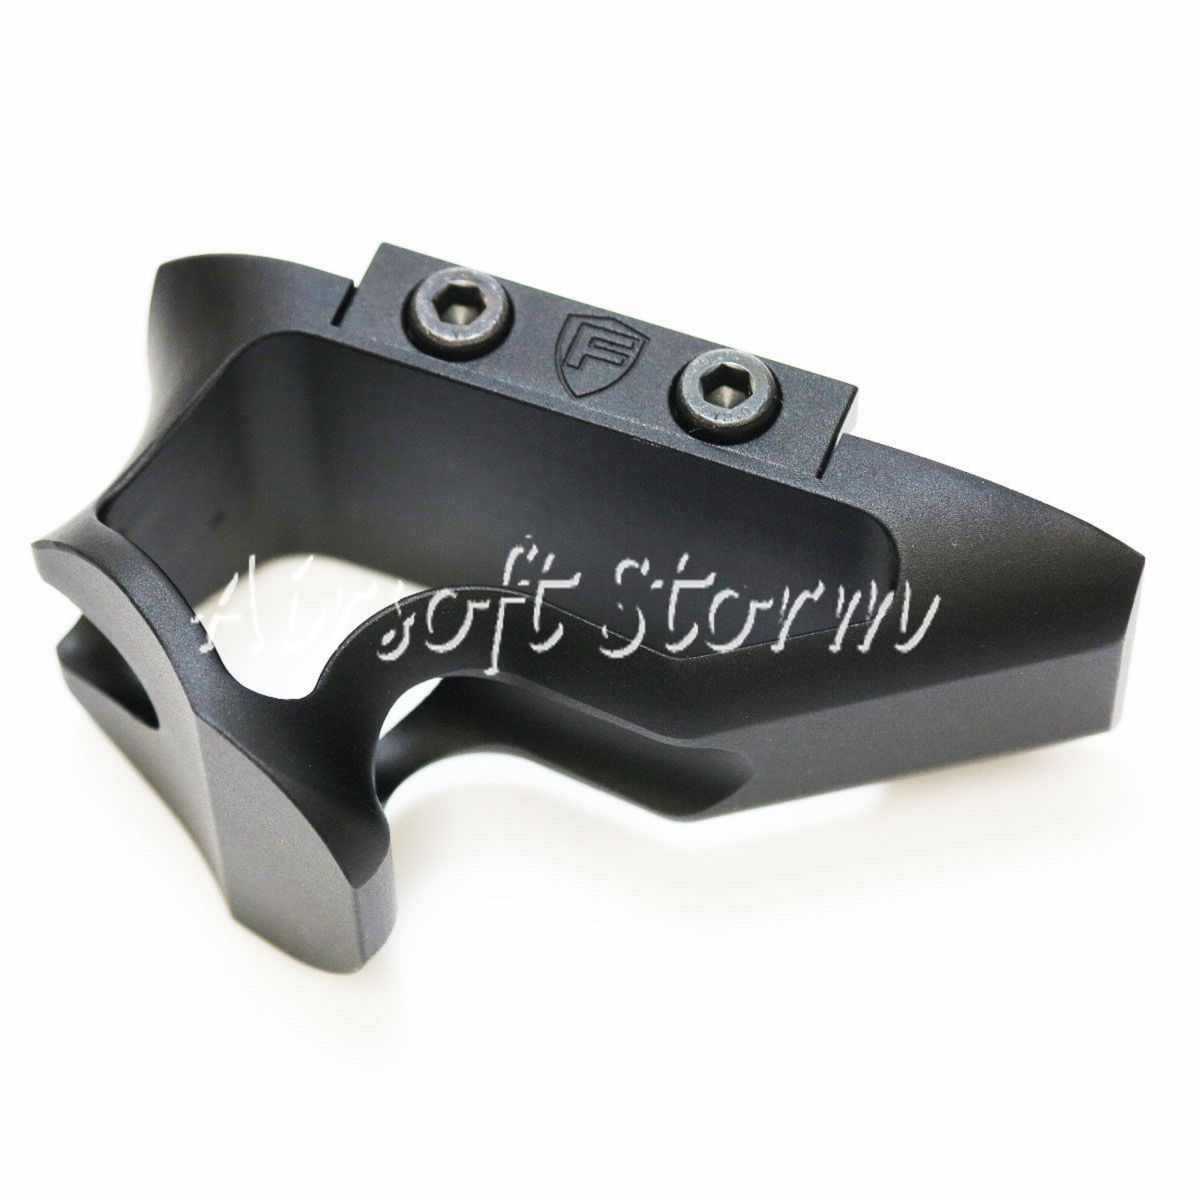 Airsoft Tactical Gear PTS Fortis Shift Short Angle Grip Rail Mount Version Black